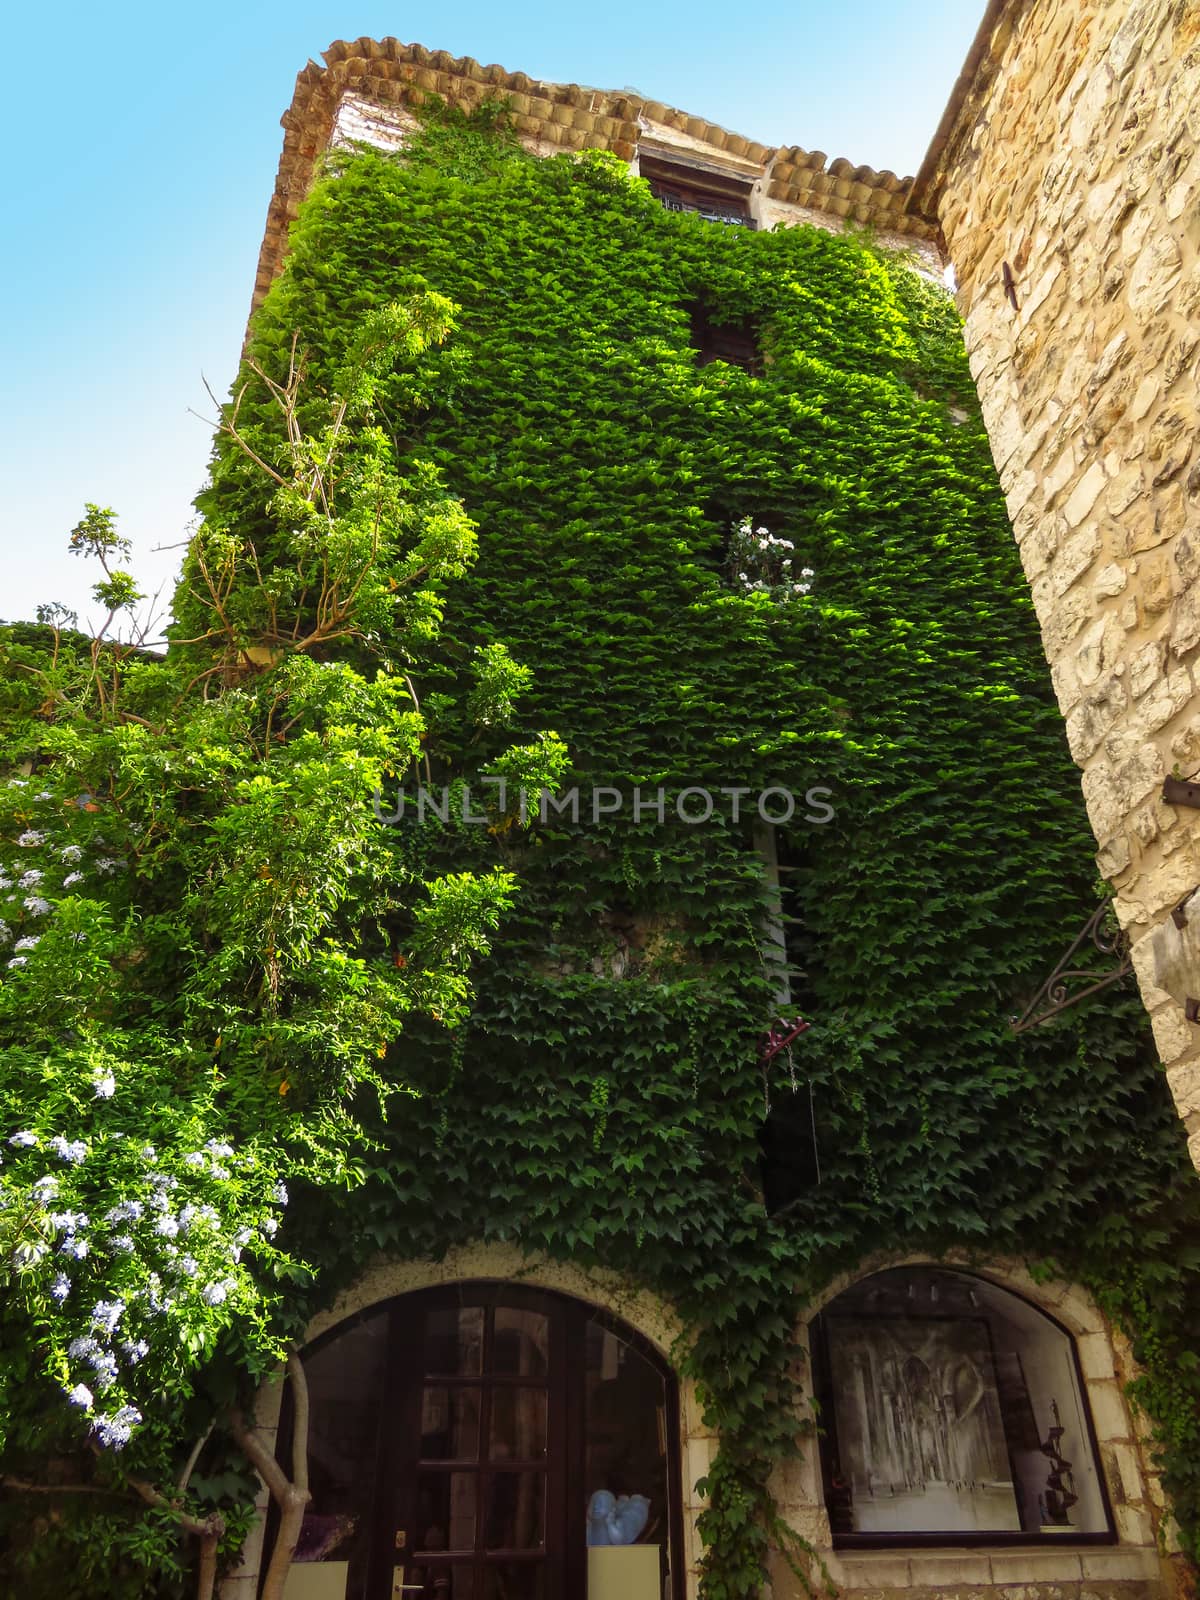 Saint Paul de Vence, France - July 9, 2018: Clambering plant on the exterior wall of the old house in Saint Paul De Vence, France.